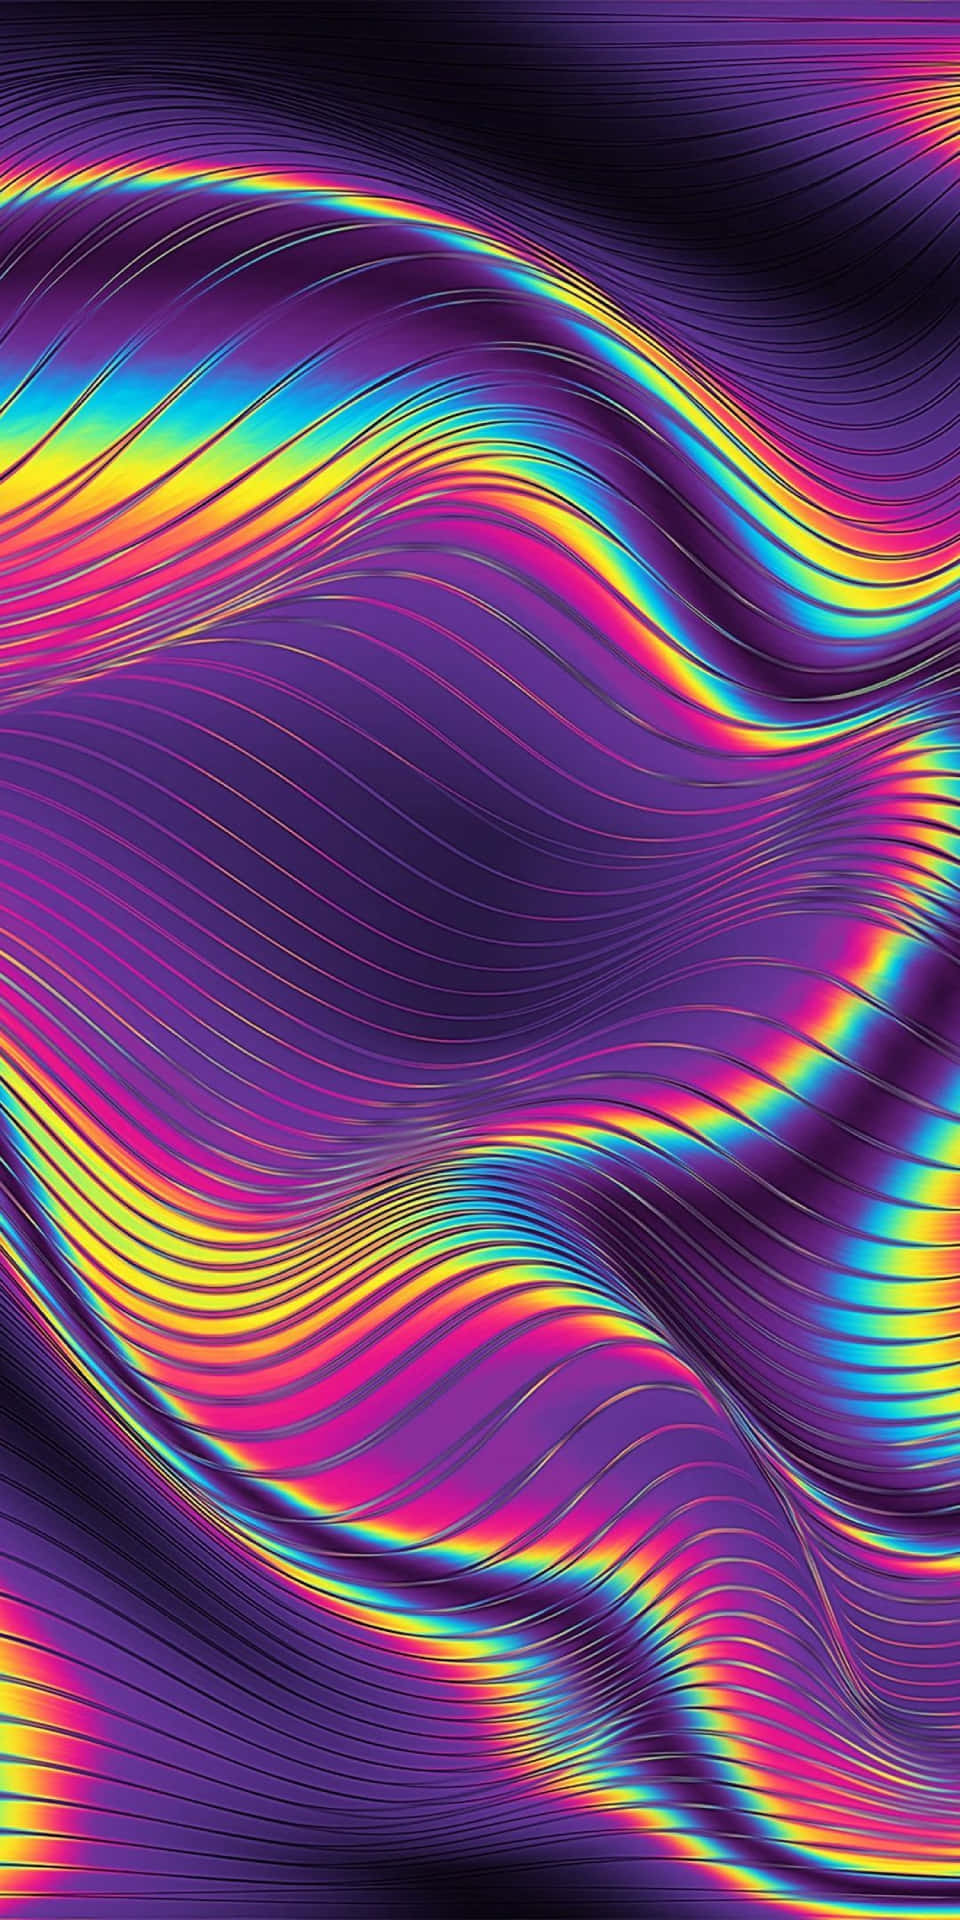 Energize Your Phone with a Neon iPhone Background